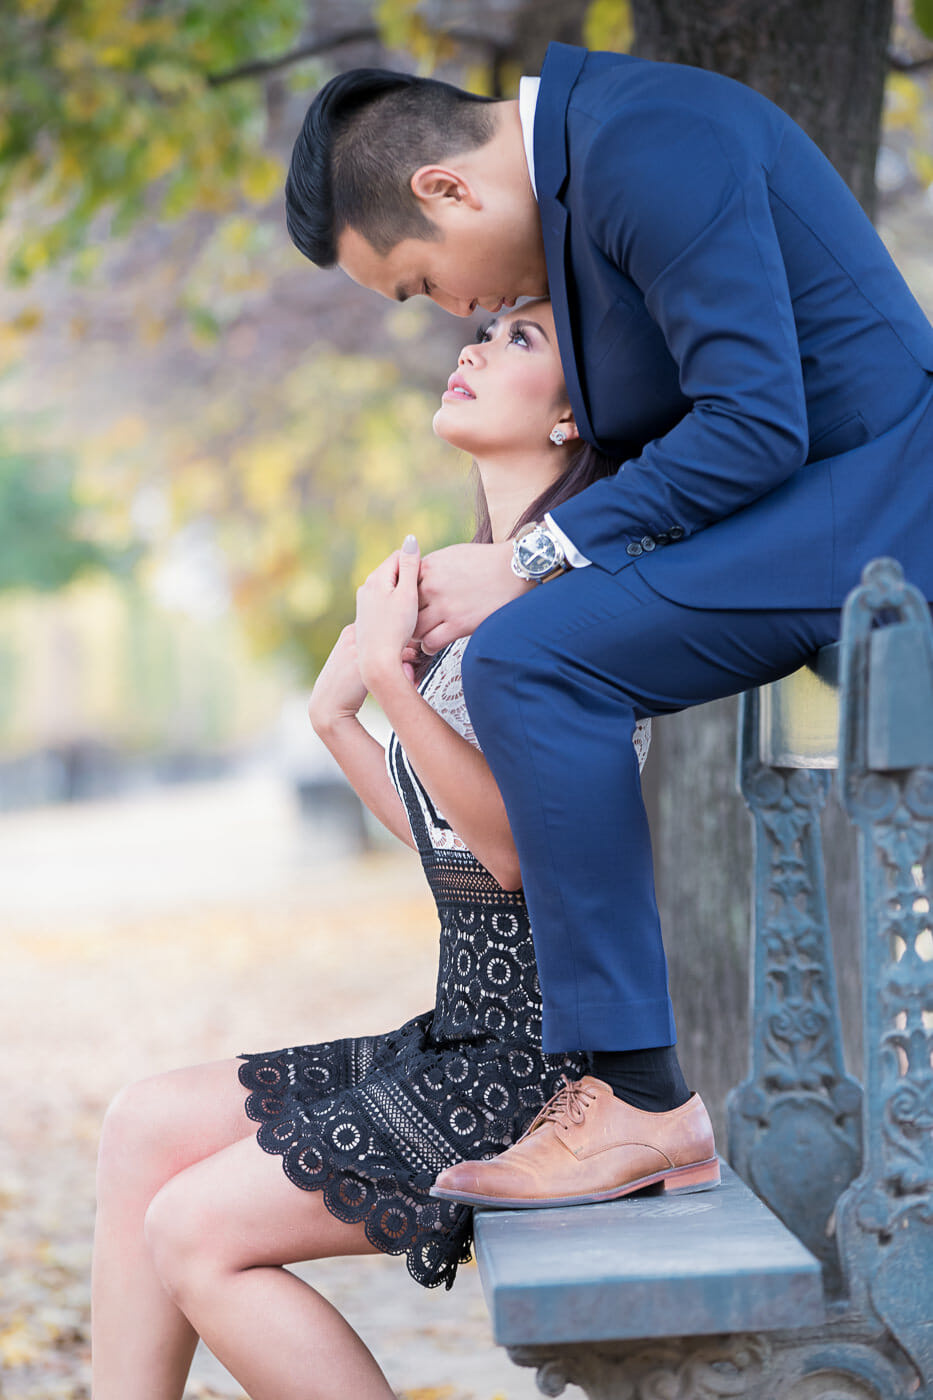 Intimate Paris engagement photos in the Tuileries Gardens on a bench